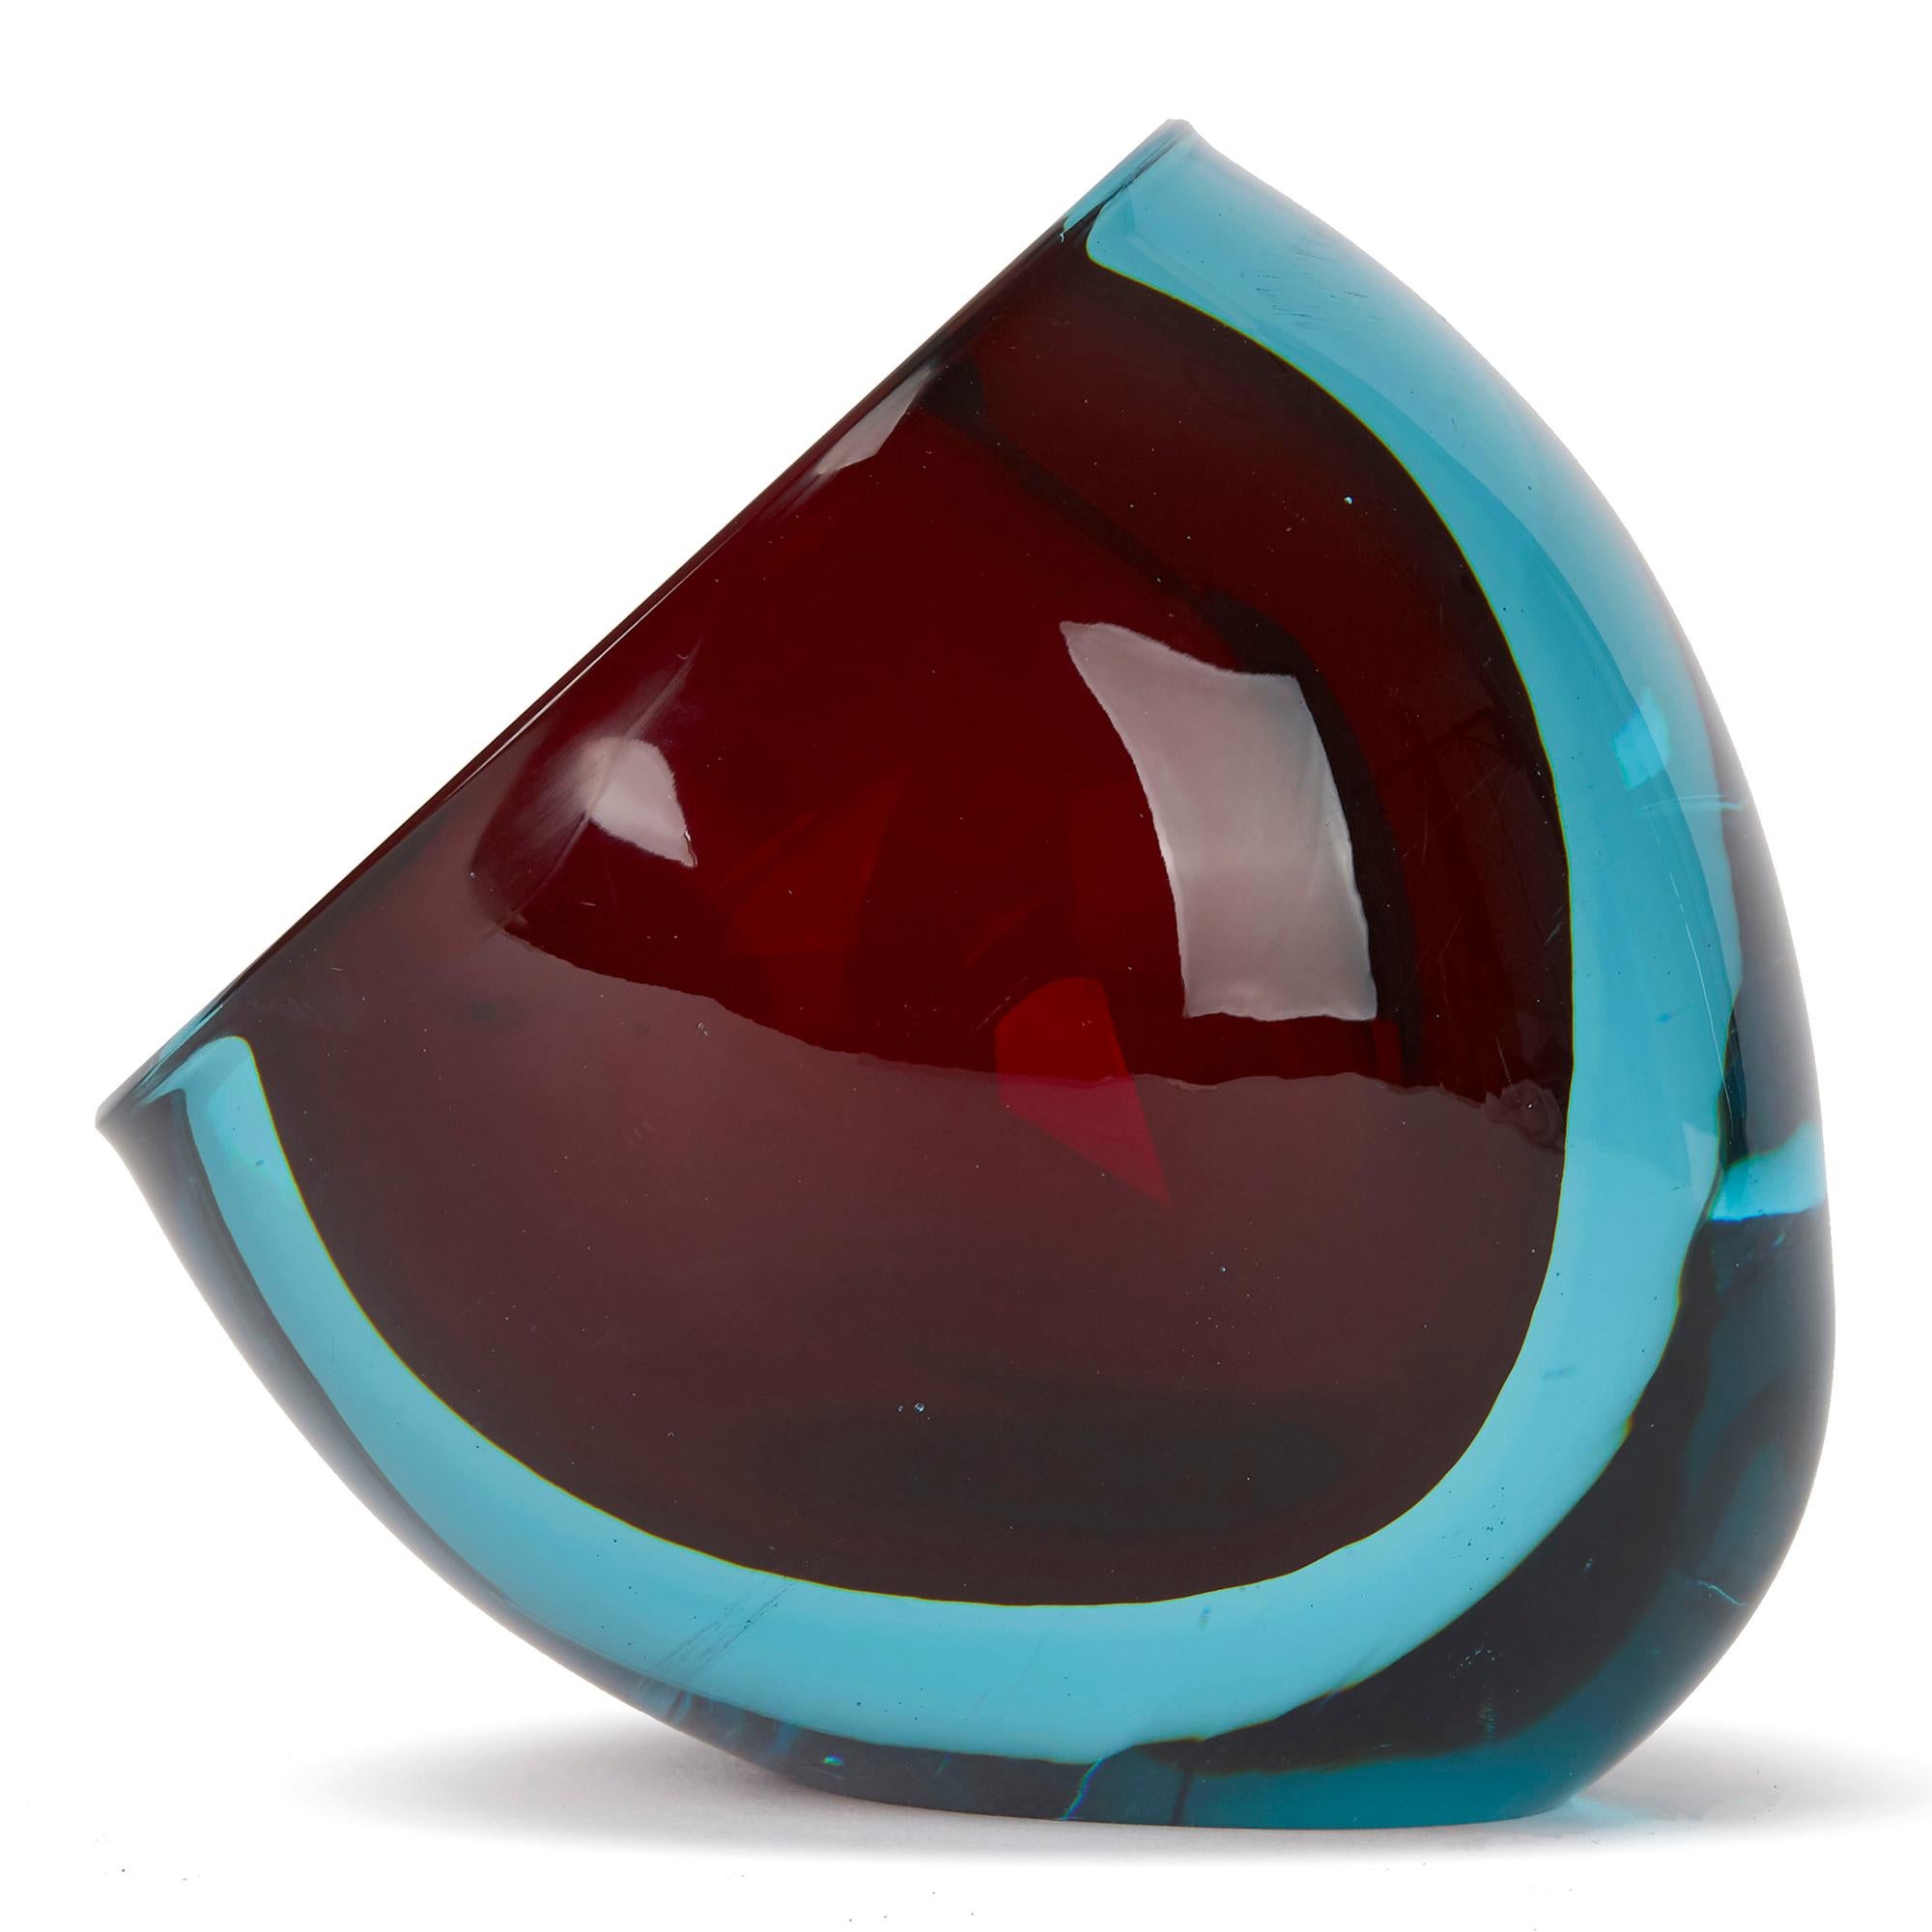 PLEASE NOTE: This piece is currently located in our Amsterdam office, please enquire for delivery times. 

A stylish vintage Italian Murano art glass bowl or ashtray in red with blue cased Sommerso style, the rounded bowl standing on an angled foot